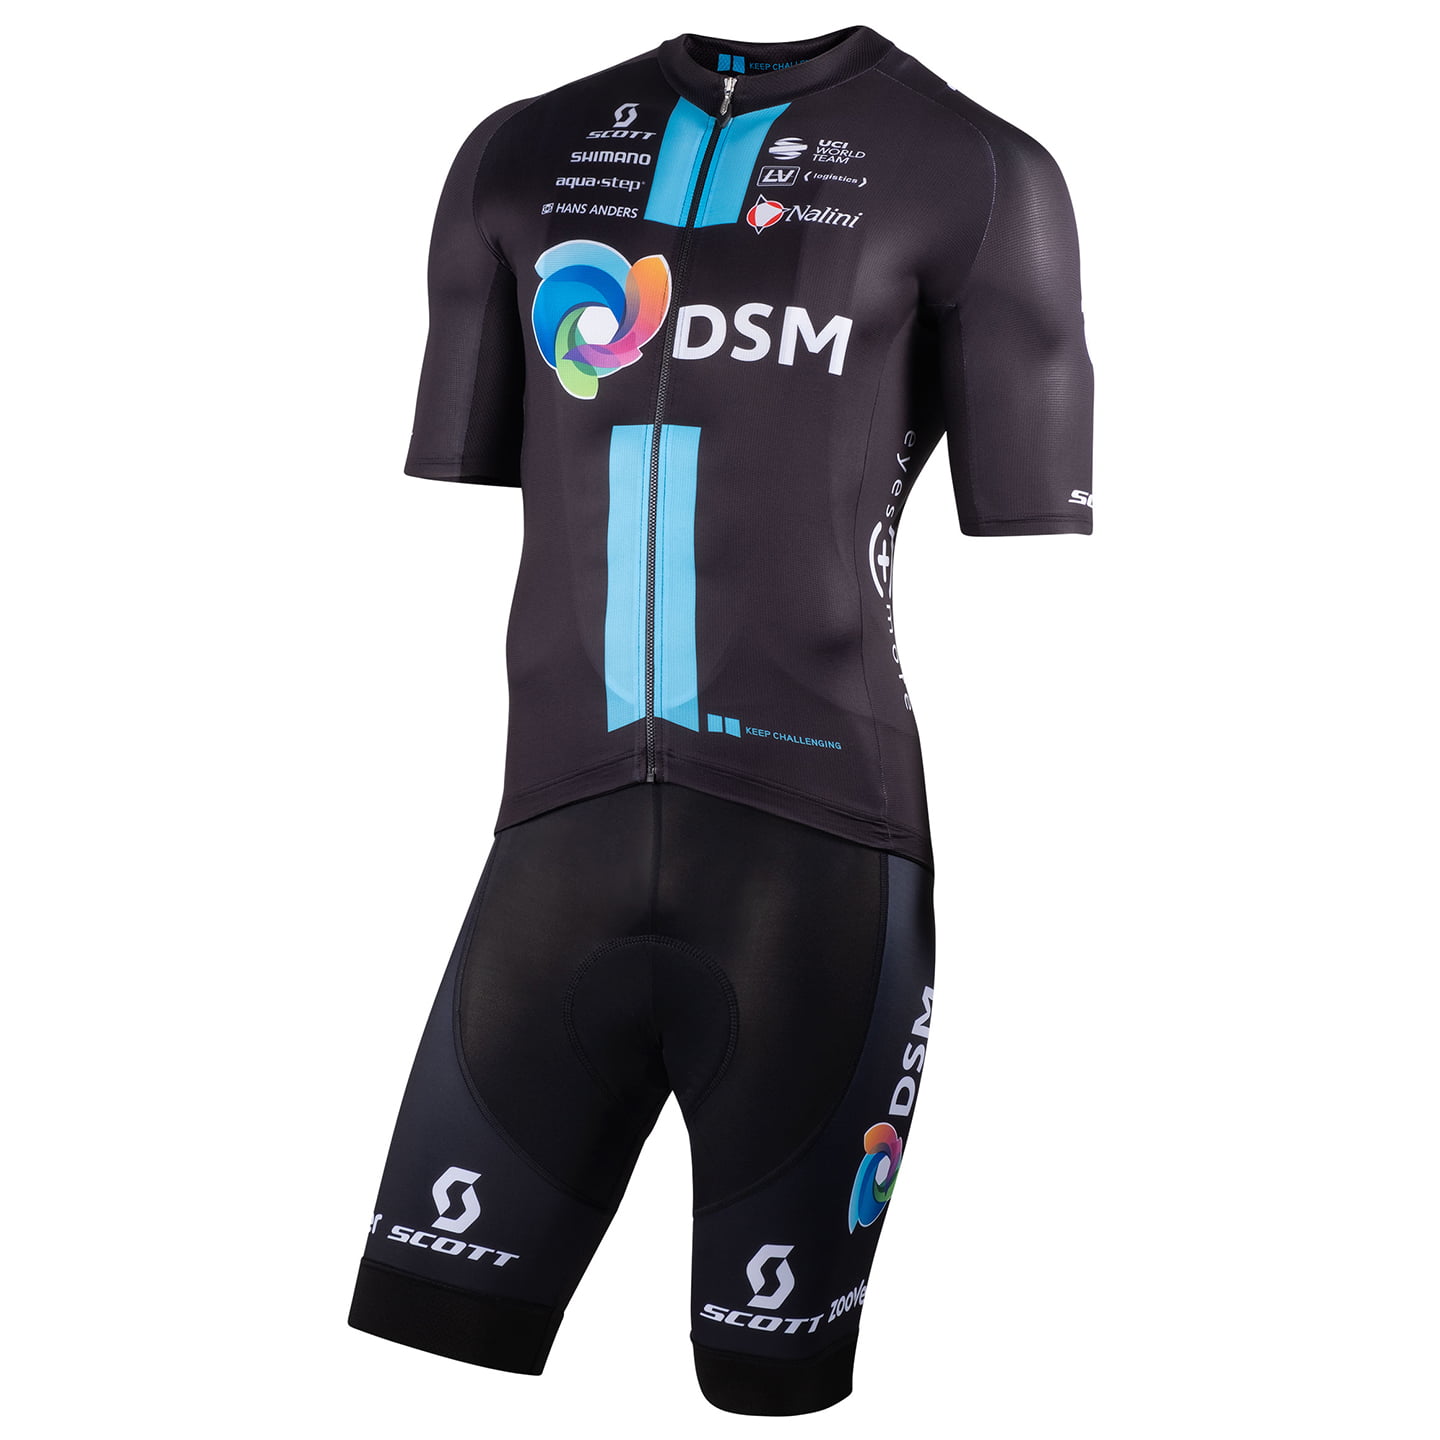 TEAM DSM 2022 Set (cycling jersey + cycling shorts) Set (2 pieces), for men, Cycling clothing